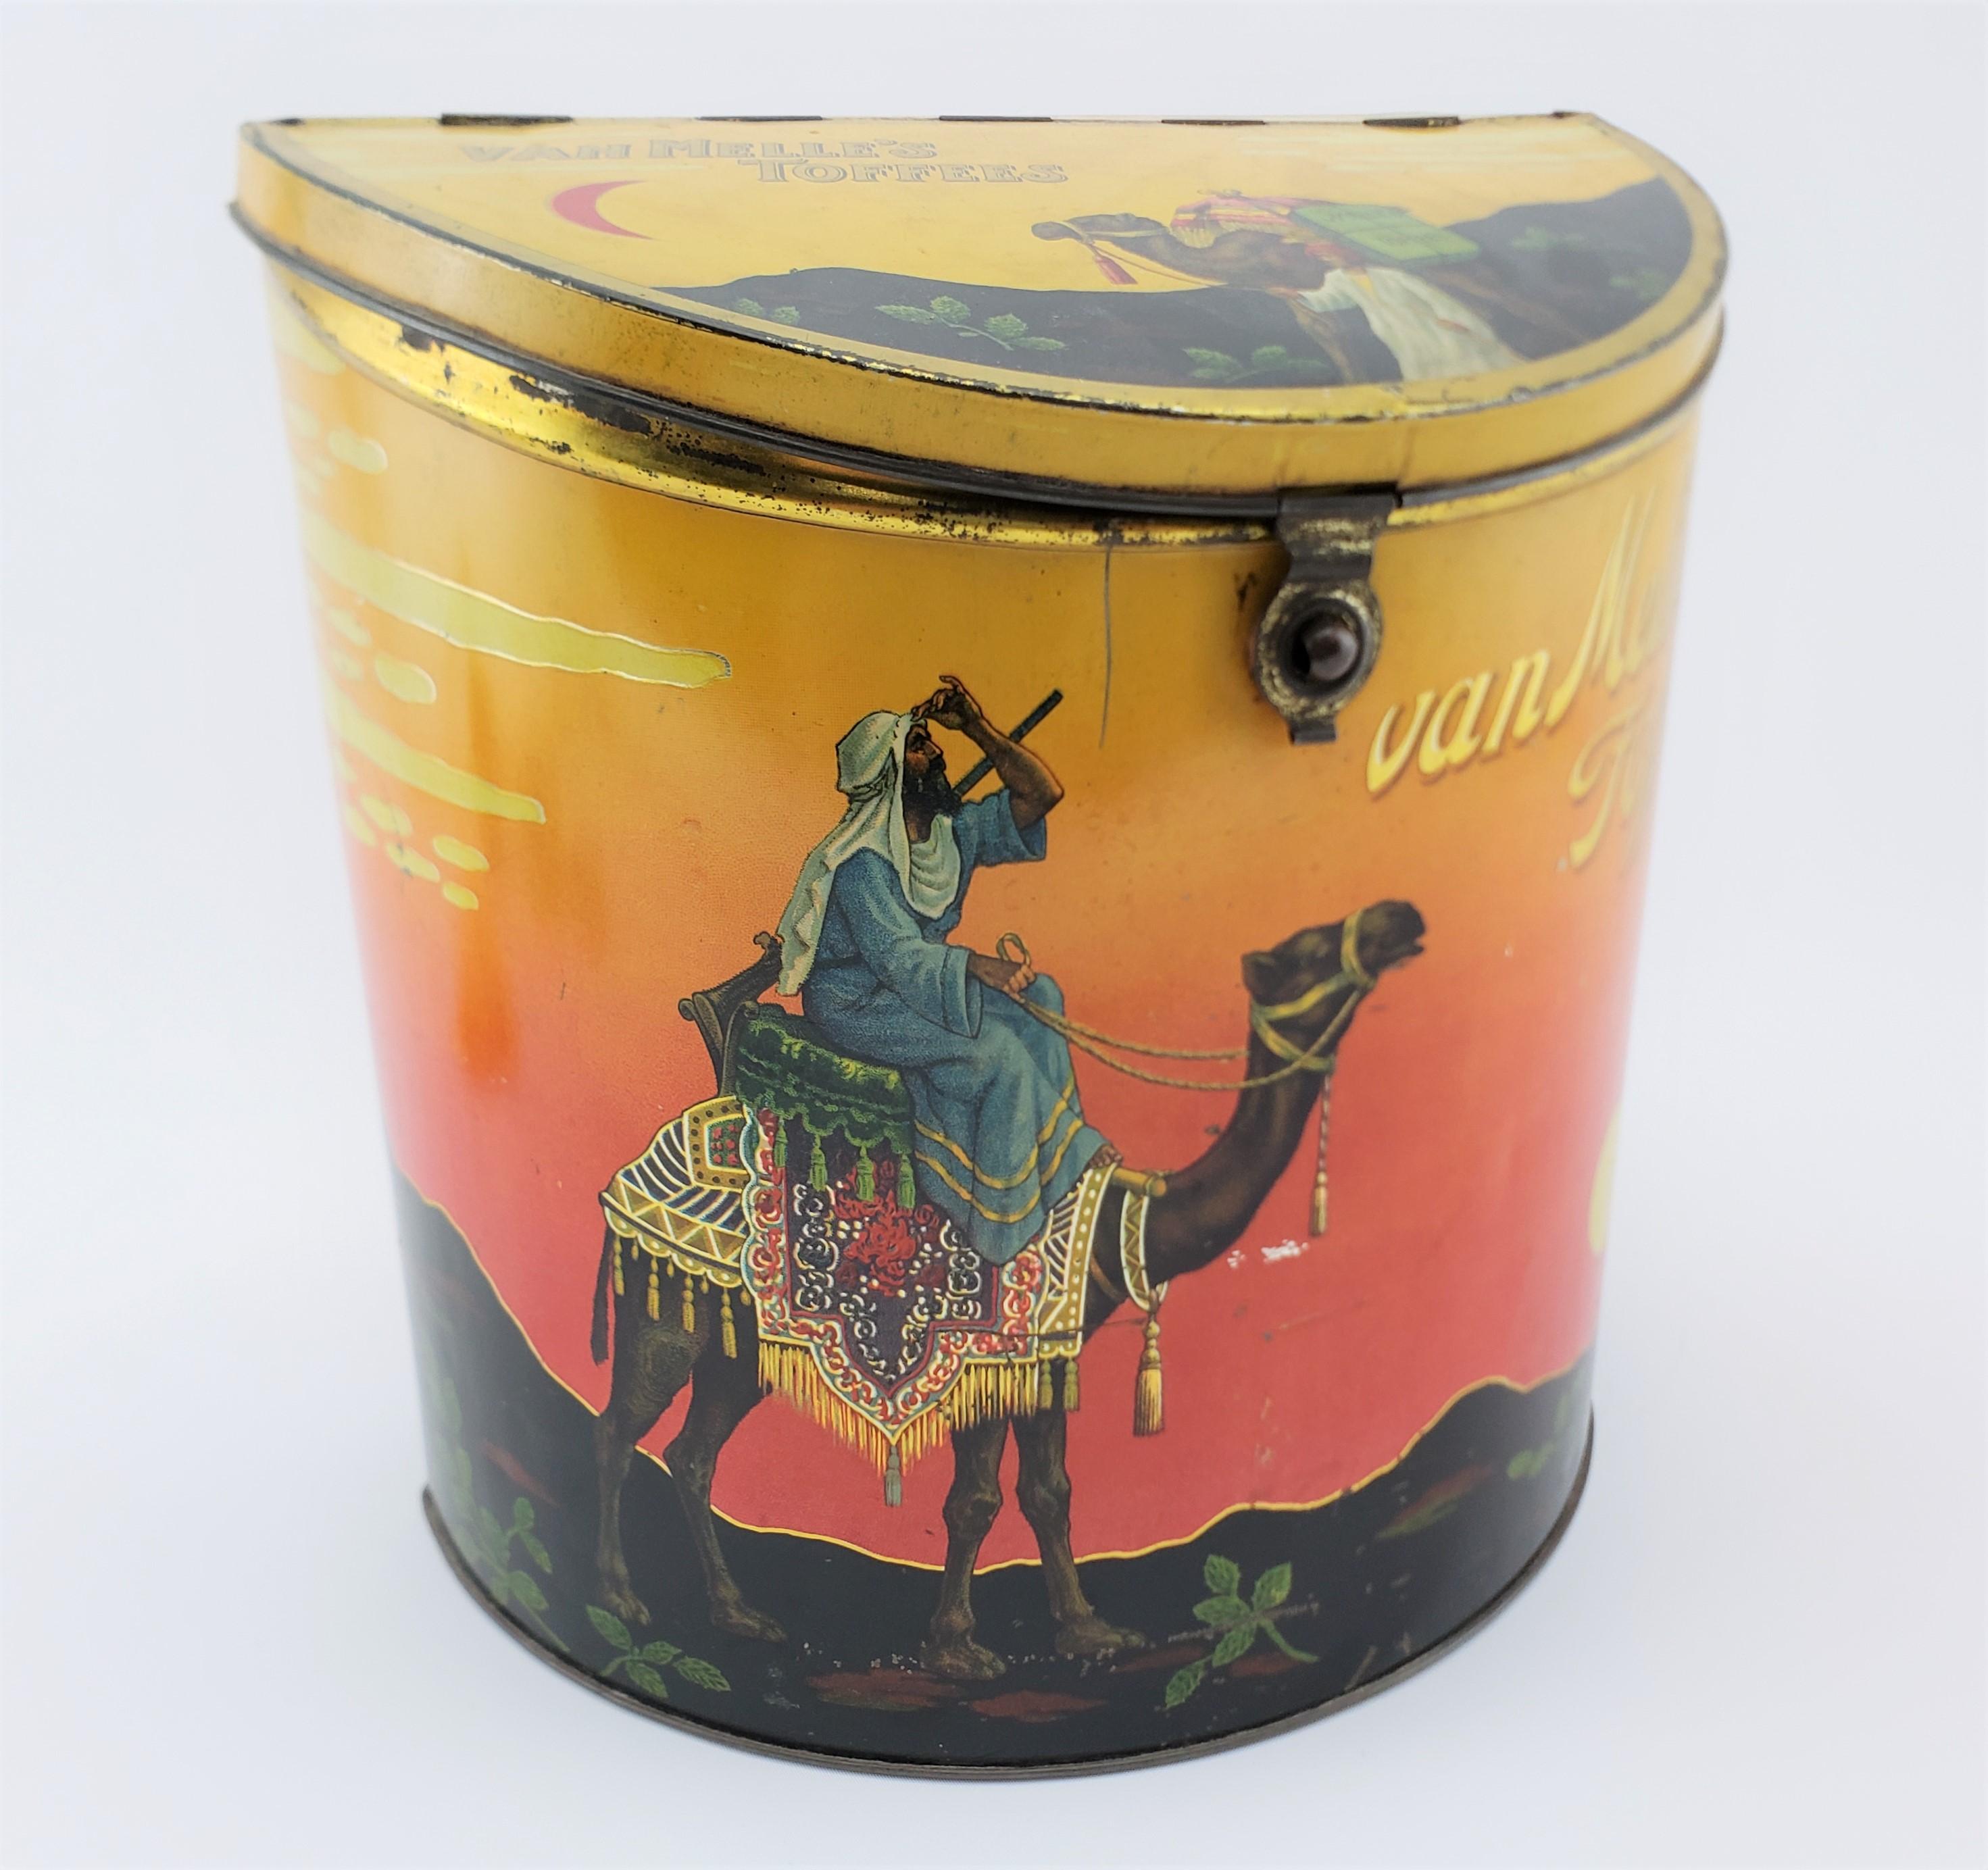 This antique Van Melles store display tin was made in Amsterdam in approximately 1925 in the period Art Deco style. The tin is half moon shaped with a hinged lid with a fold over clasp on the front. The entire tin is decorated with a desert vignette